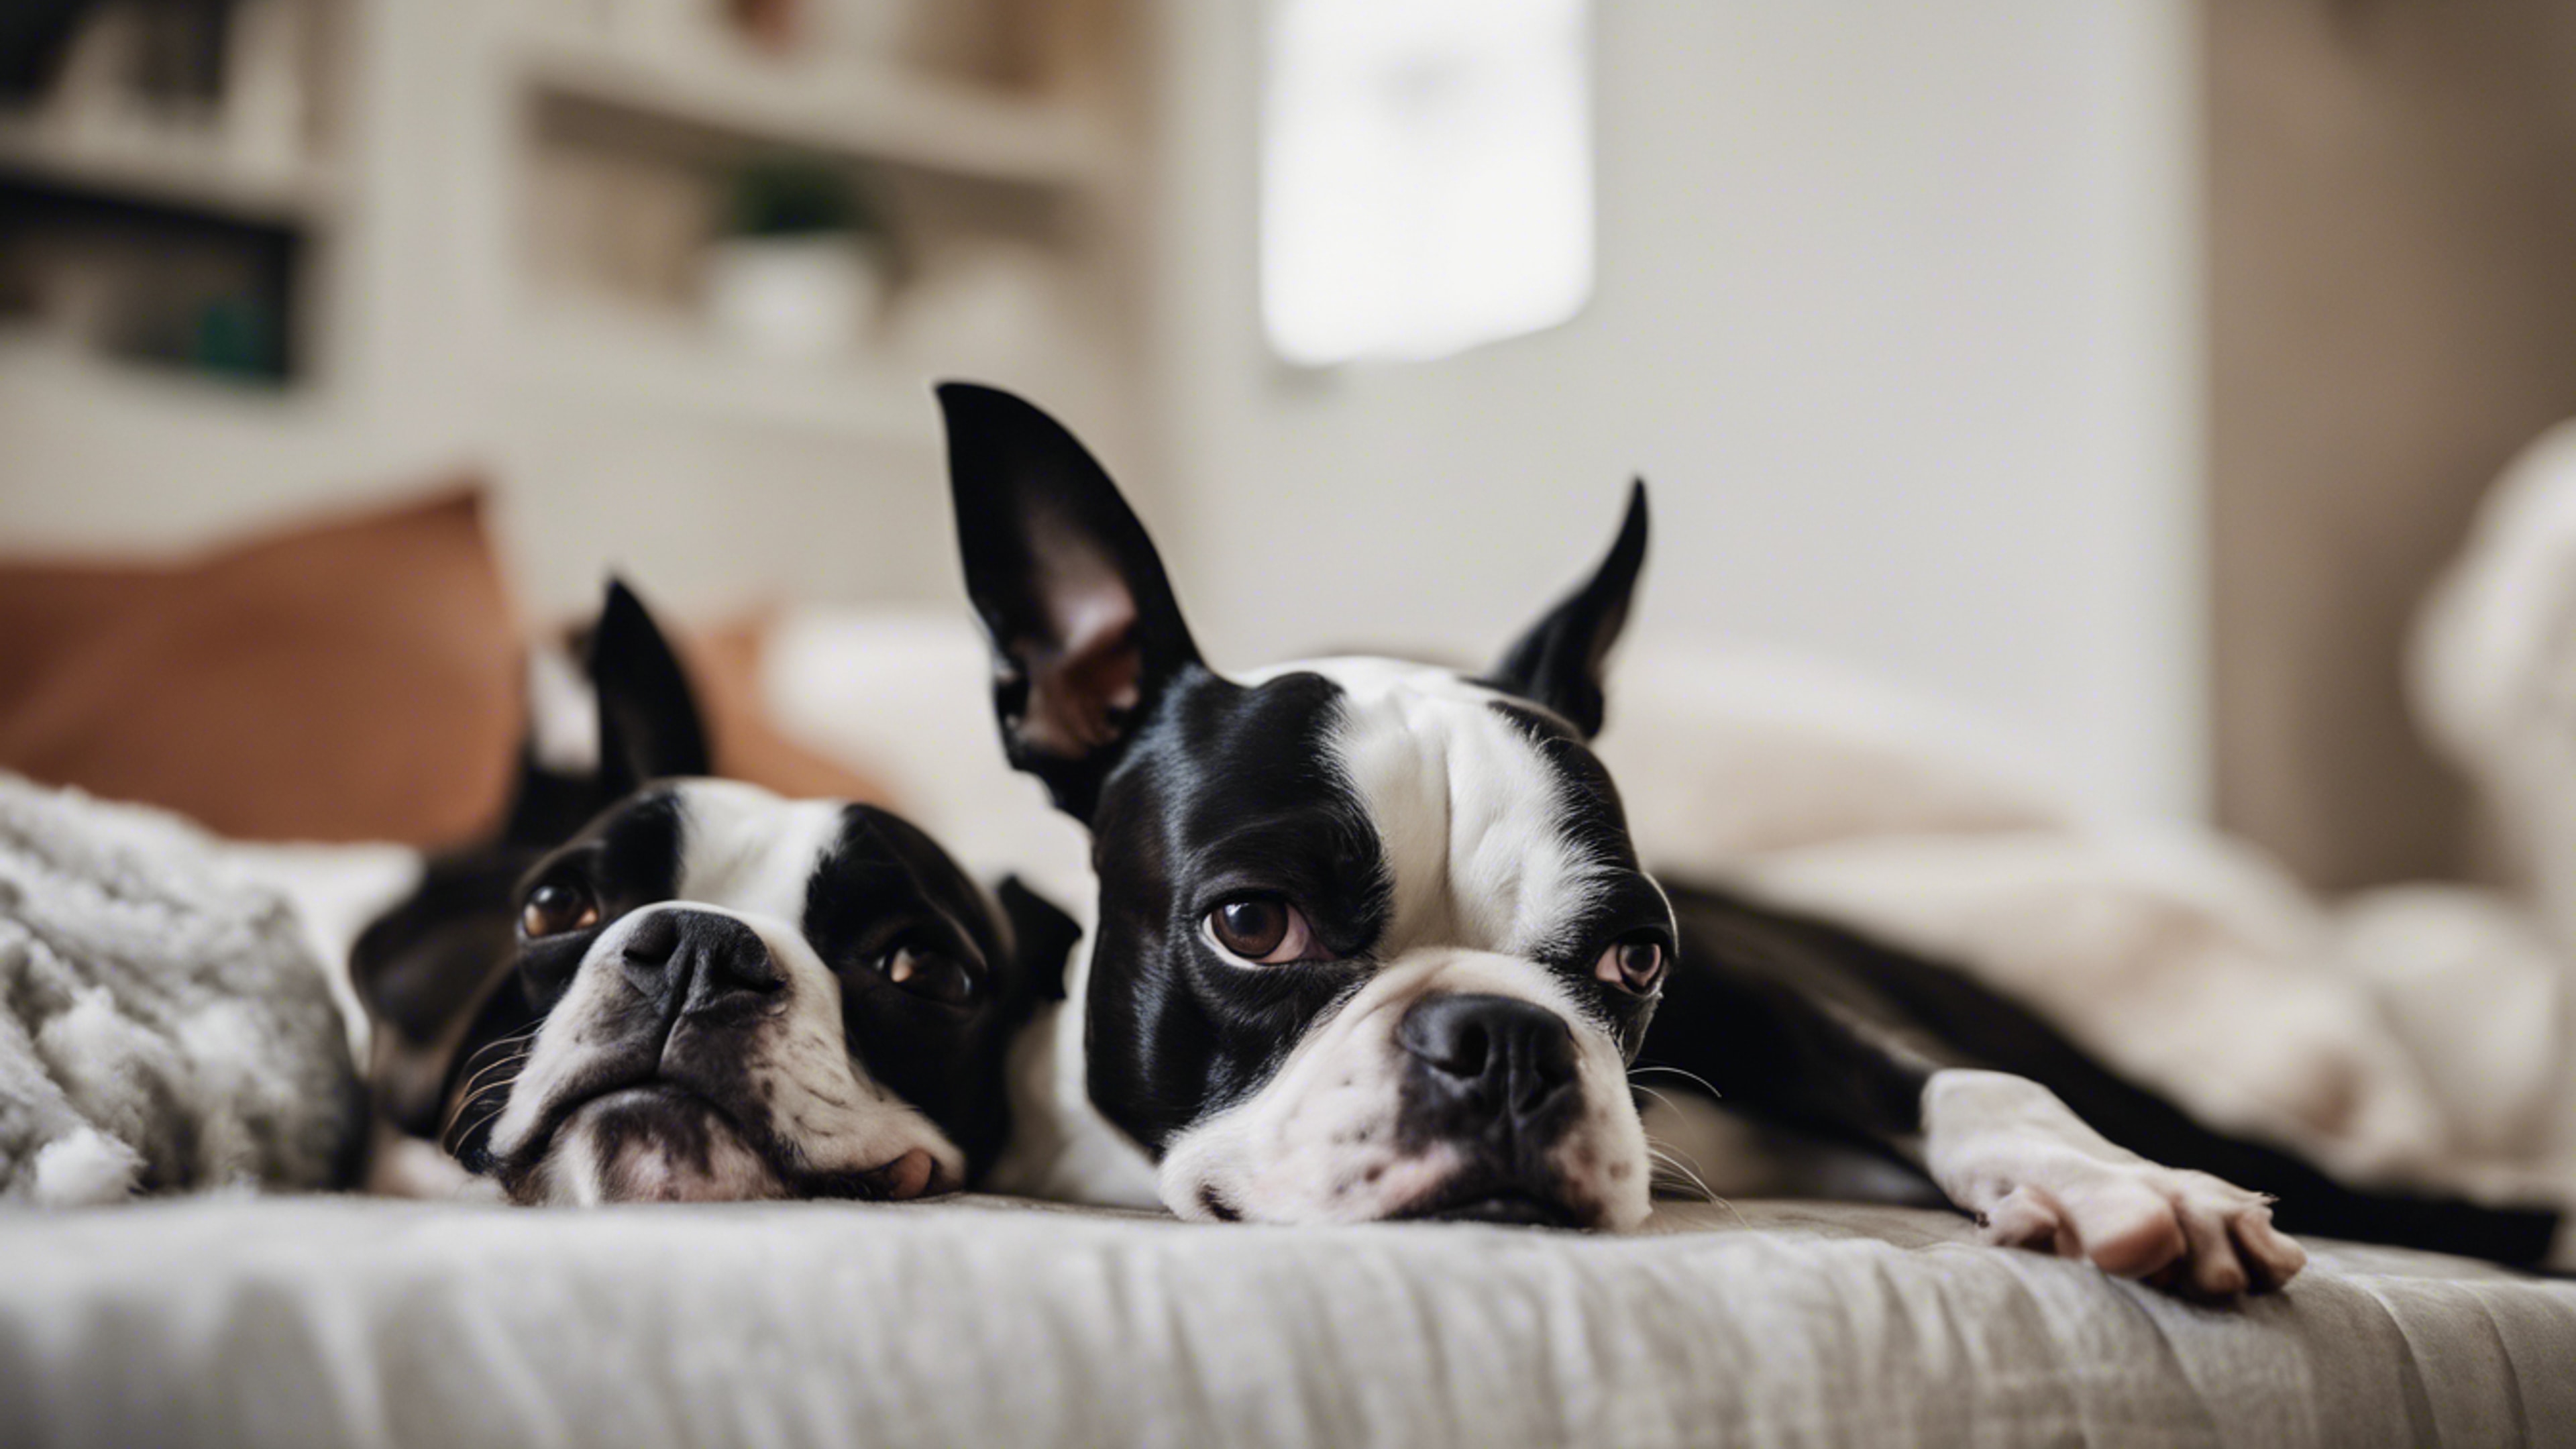 Two Boston Terriers laying comfortably on their sides, dozing away the afternoon in a suburban home. Tapeta na zeď[f1fad920e9554f308ac1]